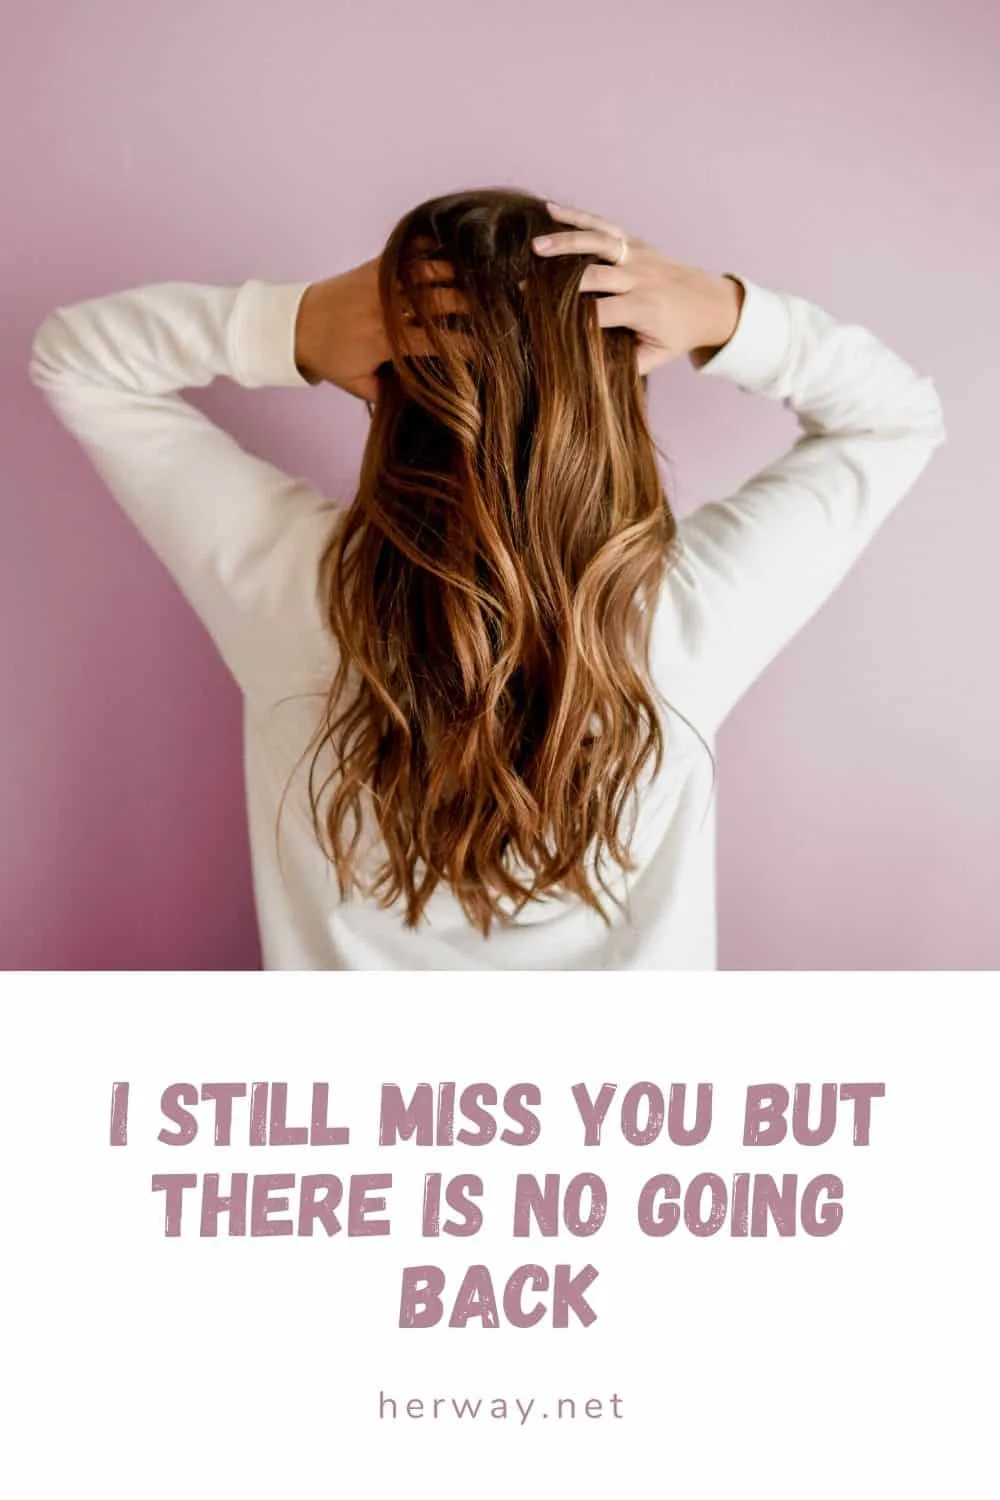 I STILL MISS YOU BUT THERE IS NO GOING BACK